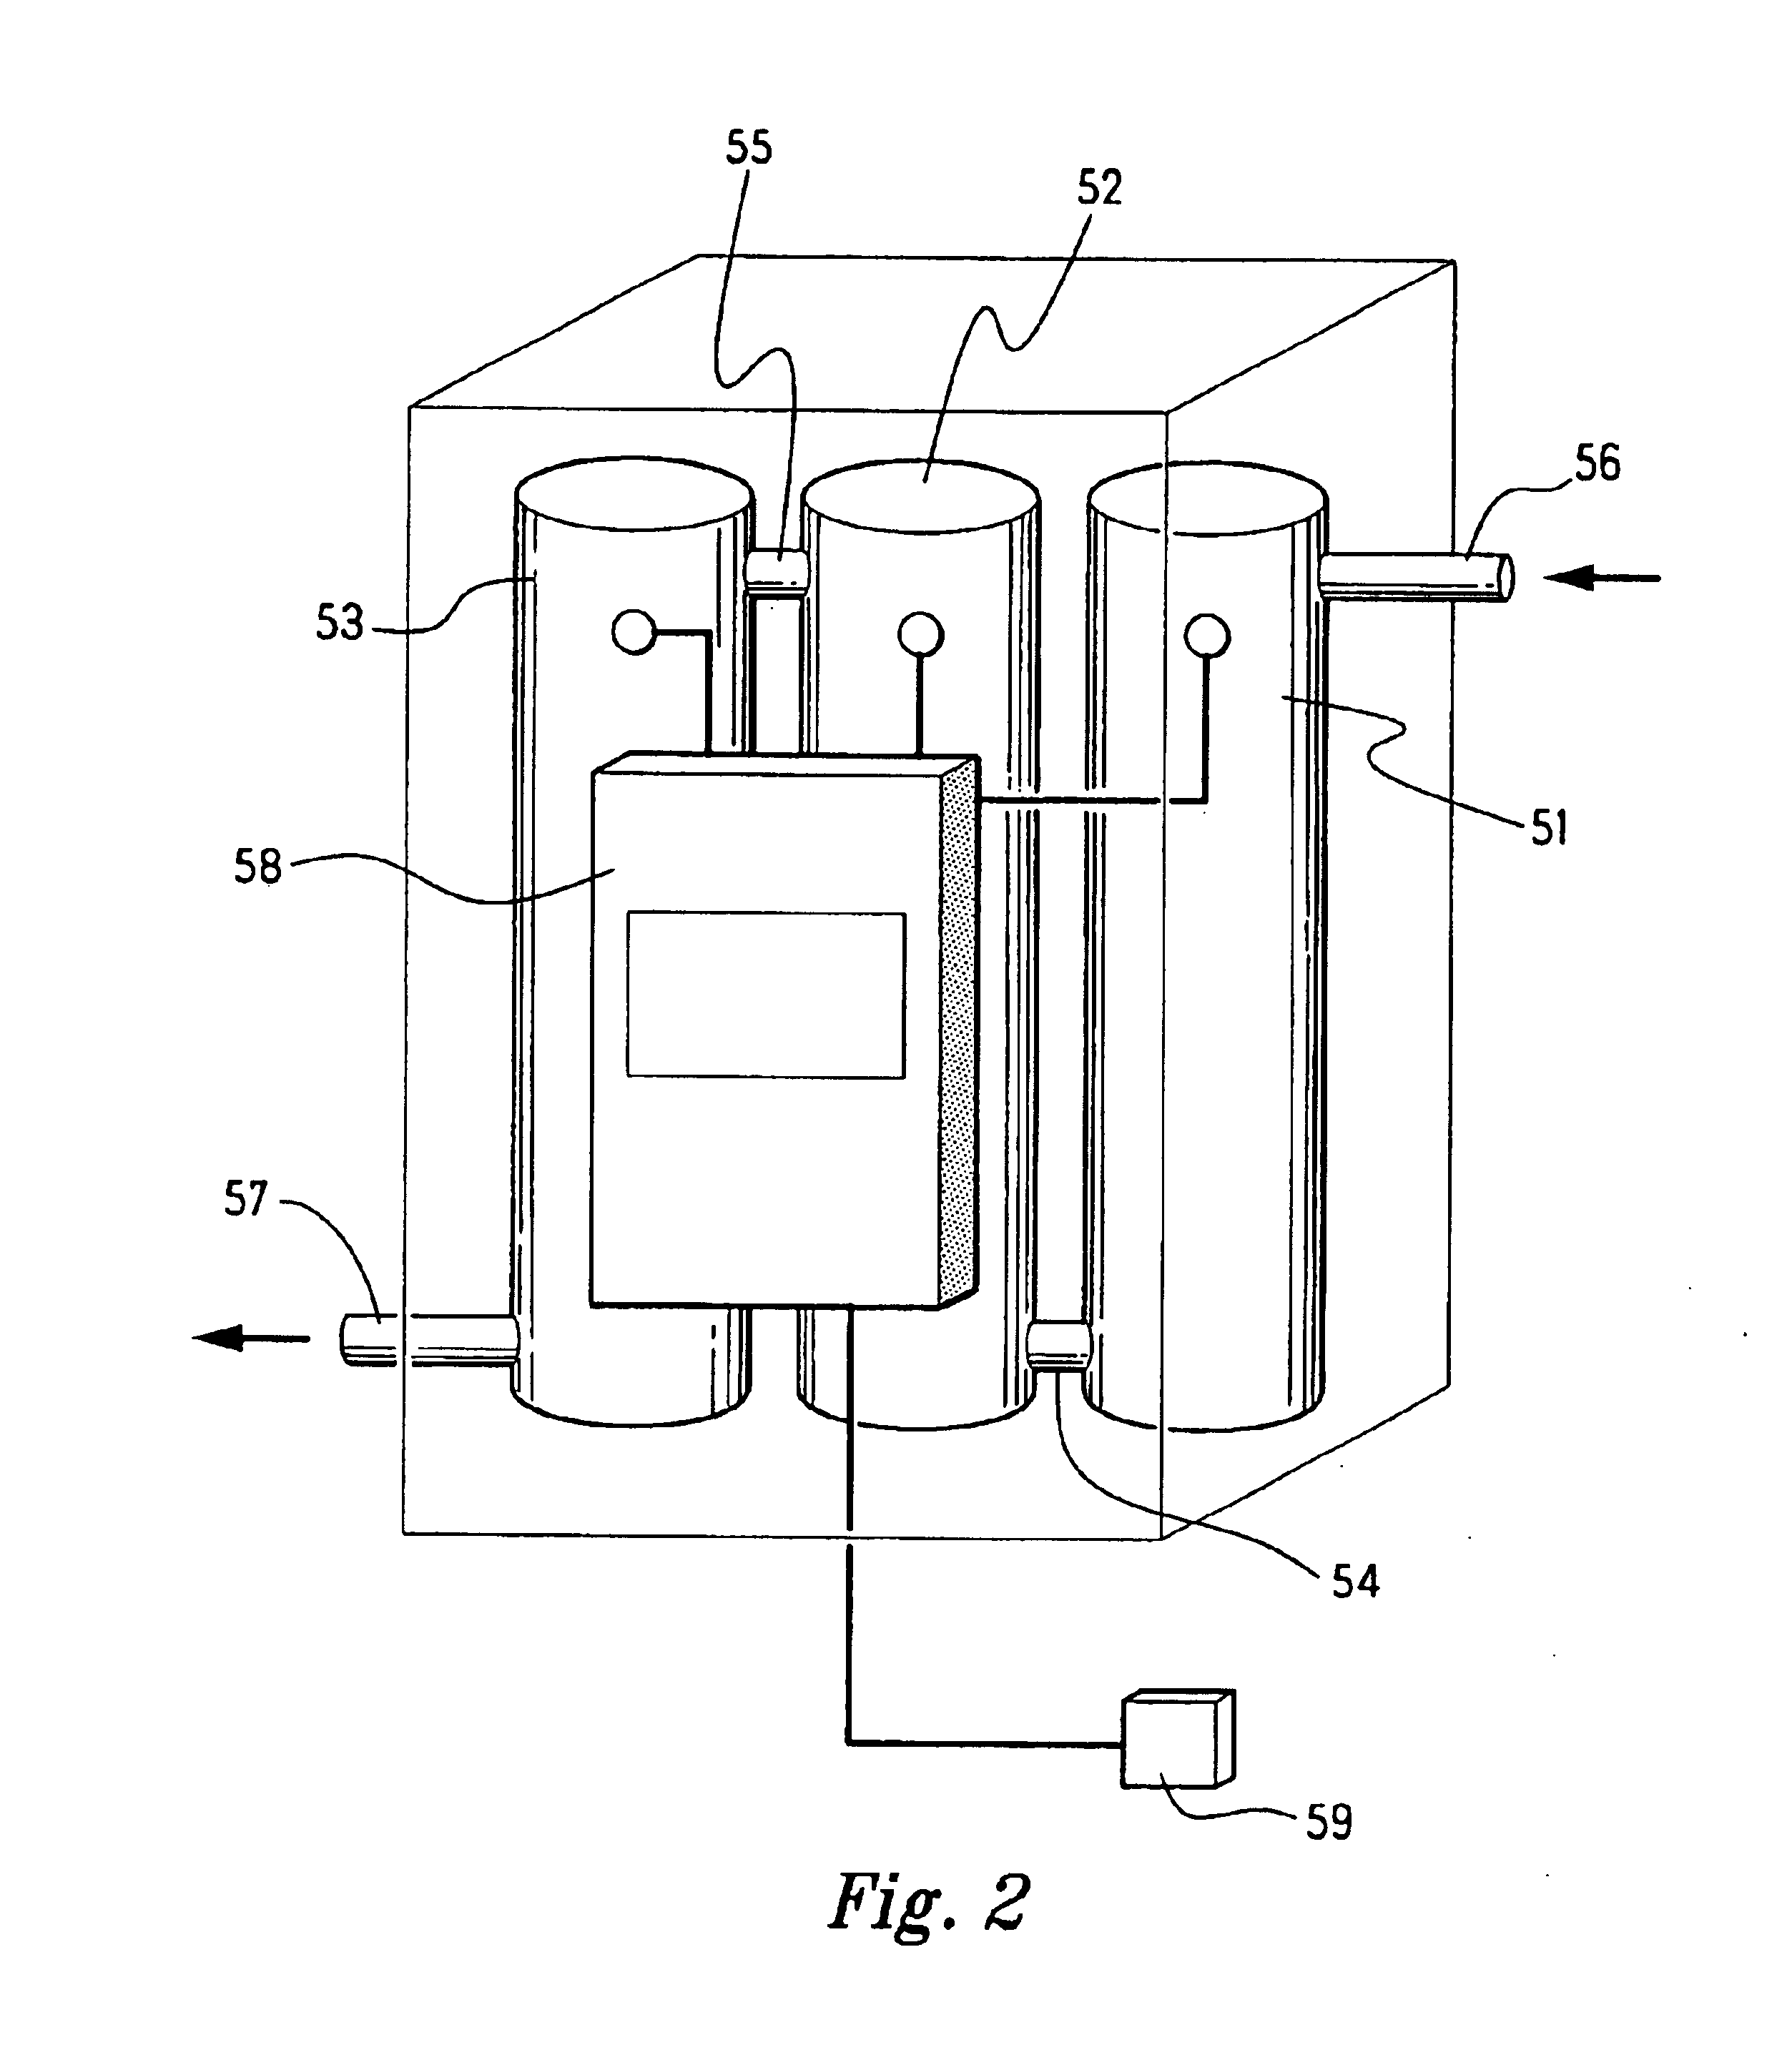 System and method for rapid heating of fluid